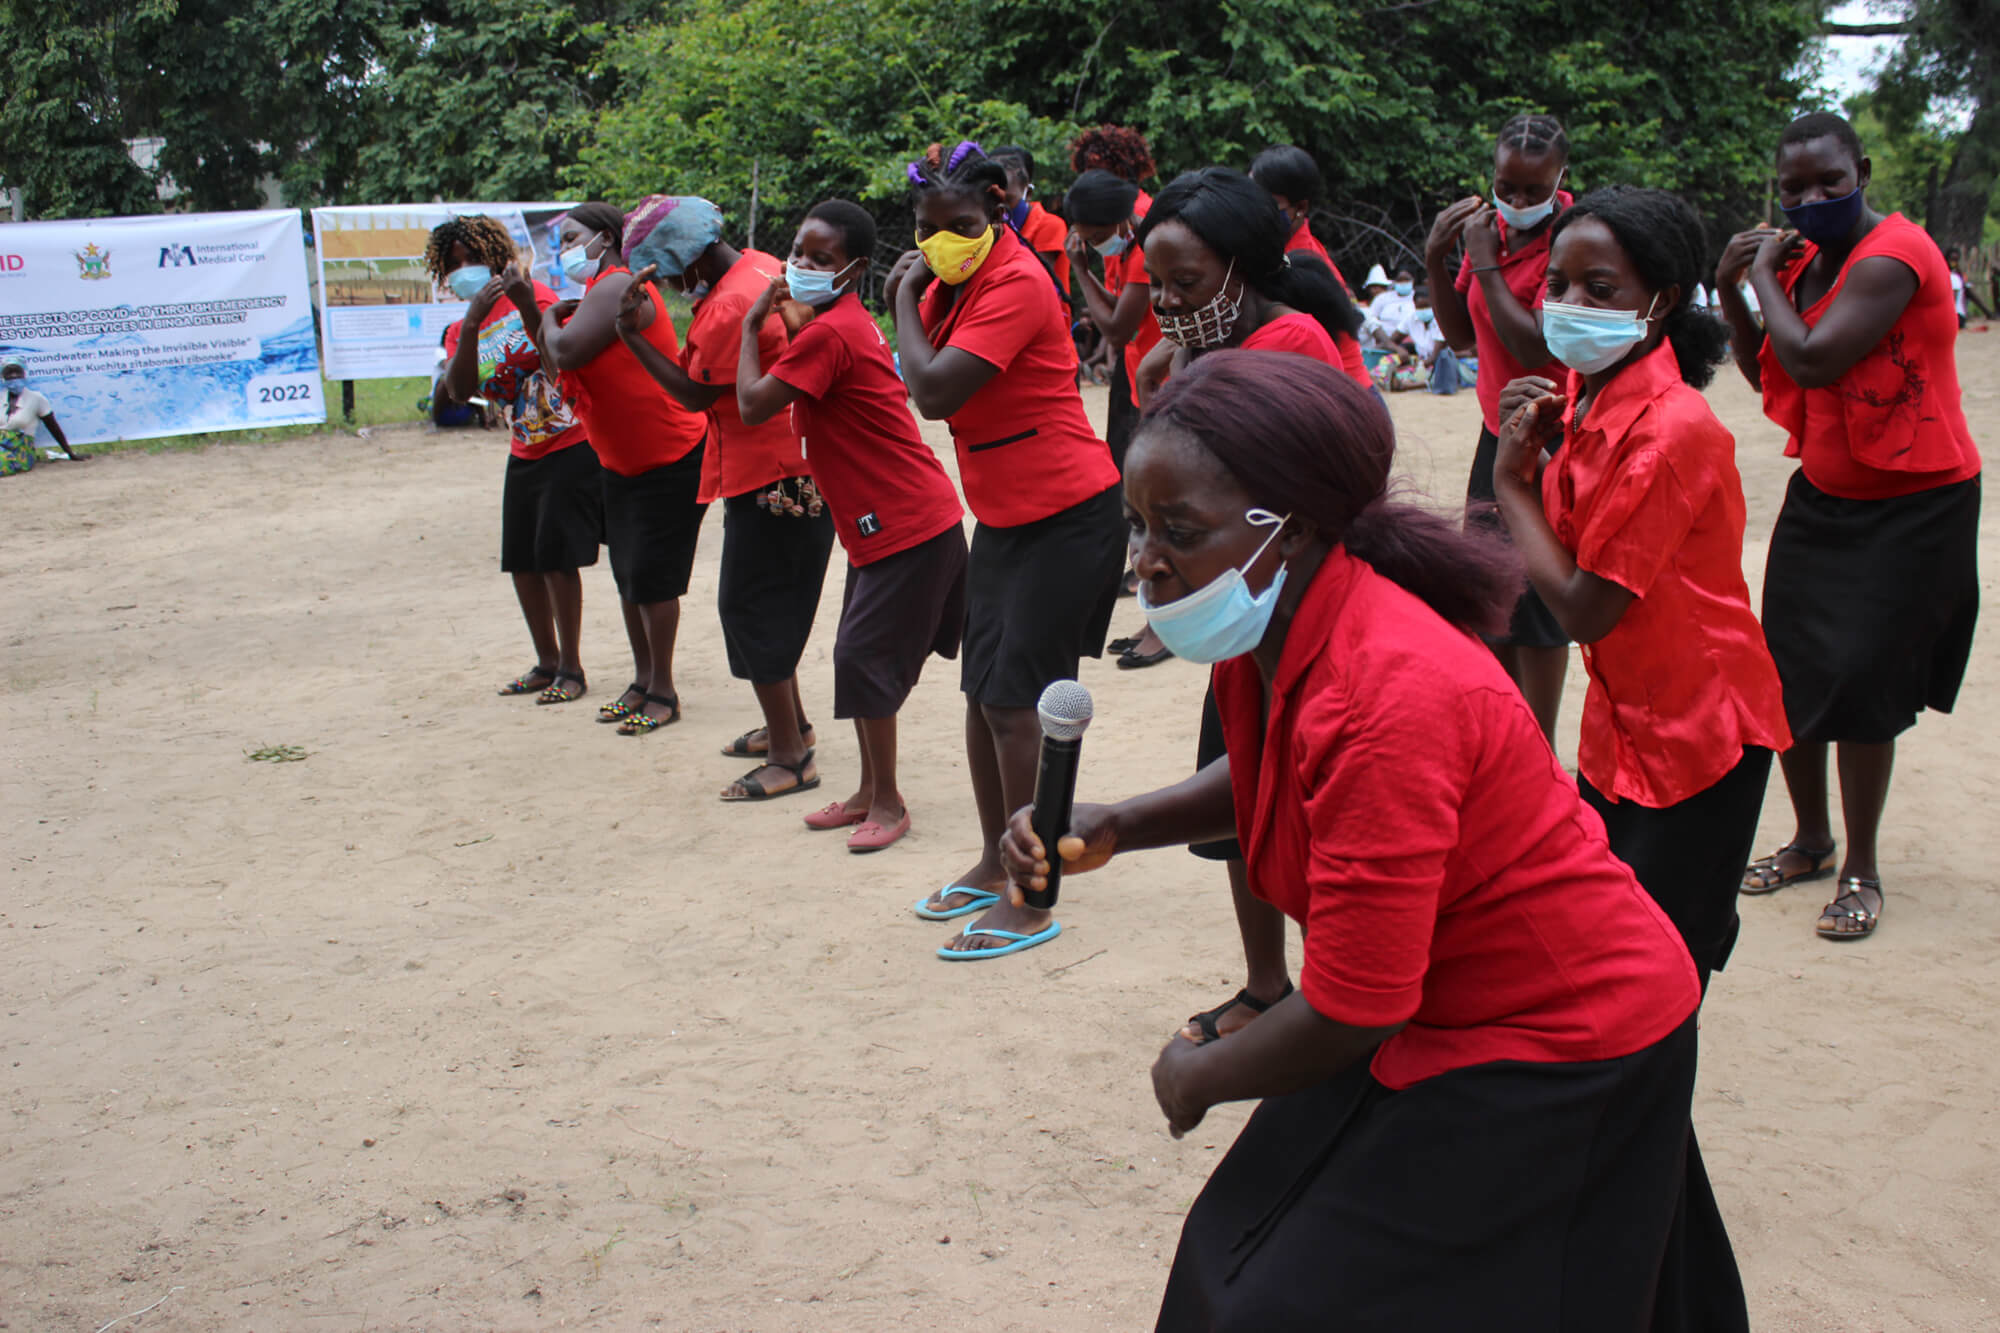 Members of the Tumvwanane community health club, from Siangwemu village, sing and perform during World Water Day.